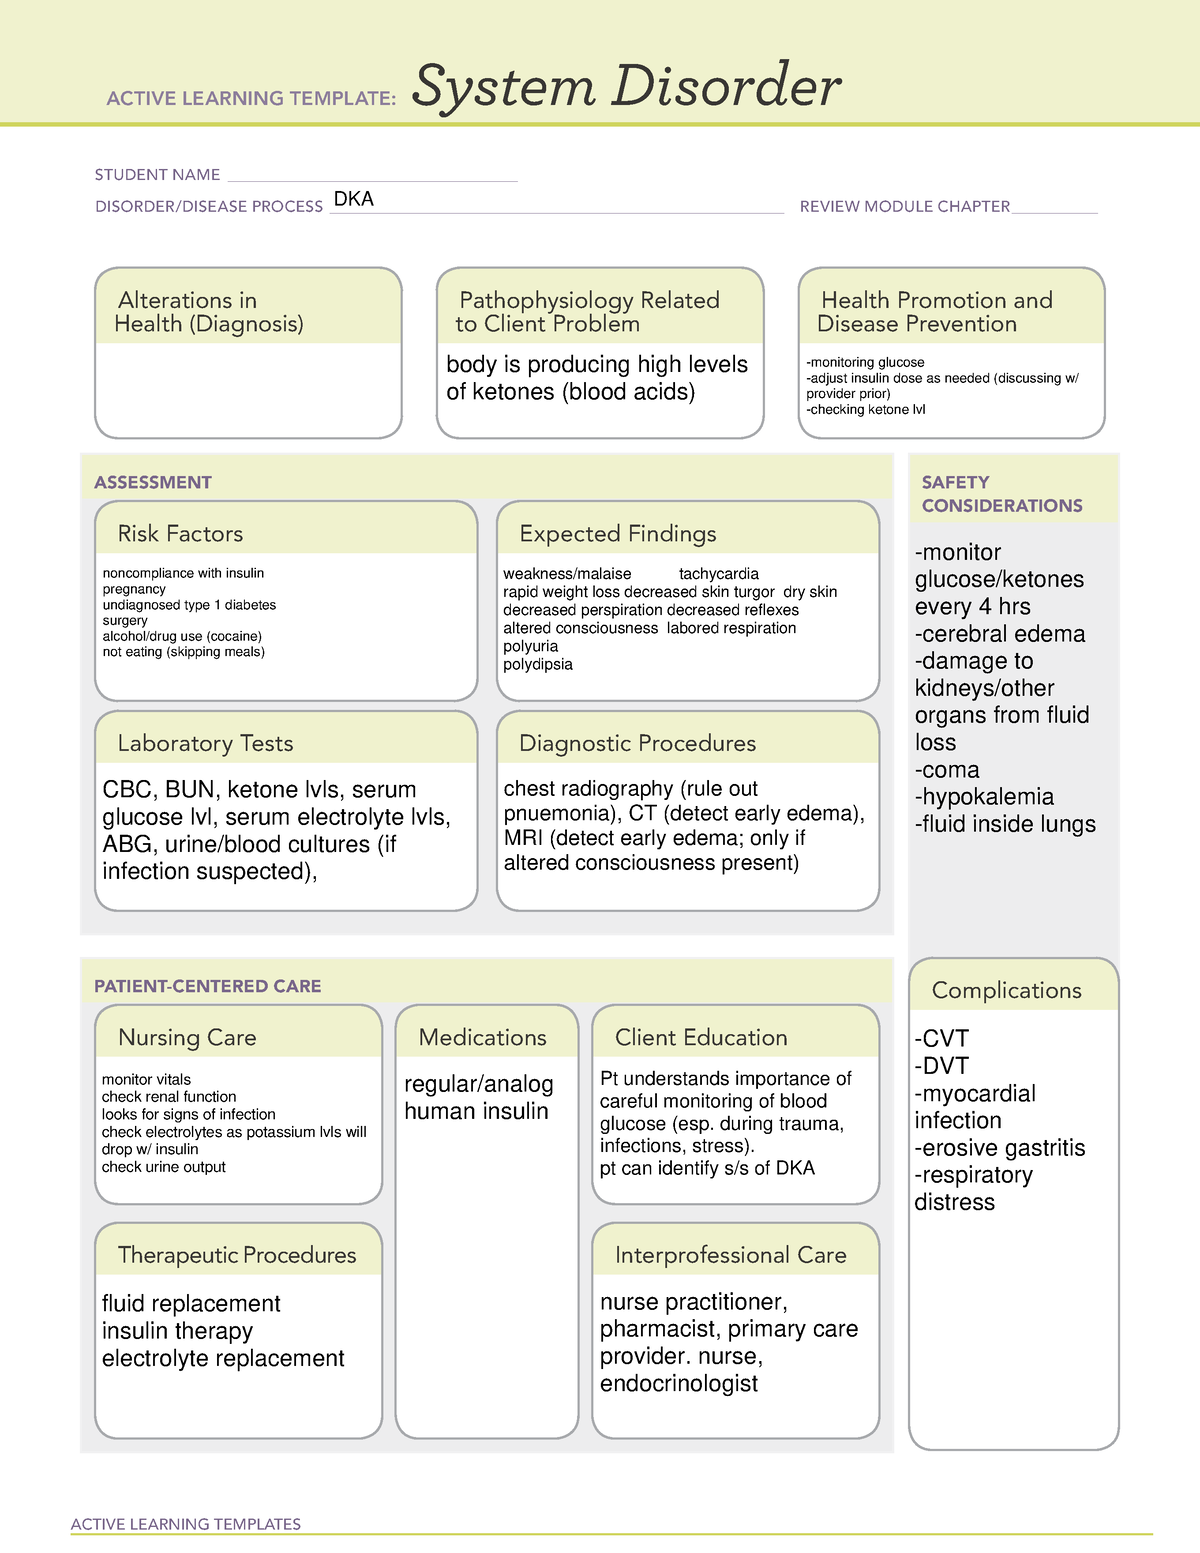 dka-system-disorder-ati-template-active-learning-templates-system